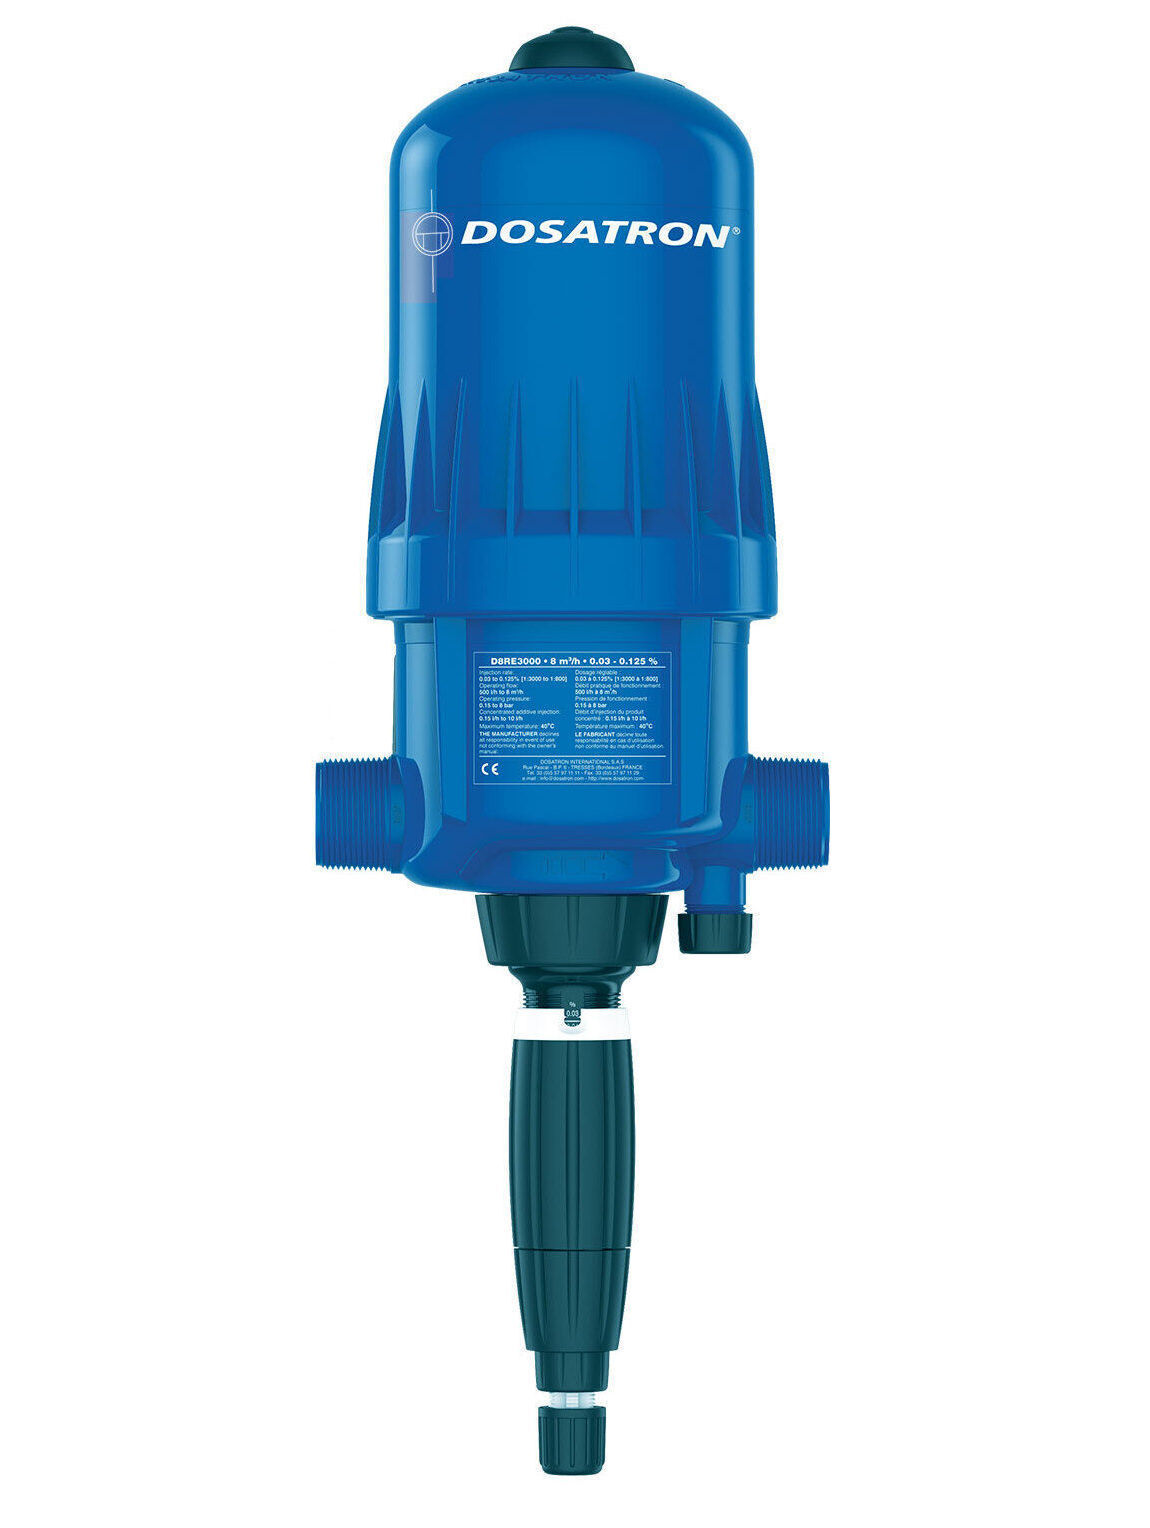 DOSATRON D8RE3000
The D8 range of dispensers meets the dosing needs for flow rates ranging from 500 to 8,000 l/h.